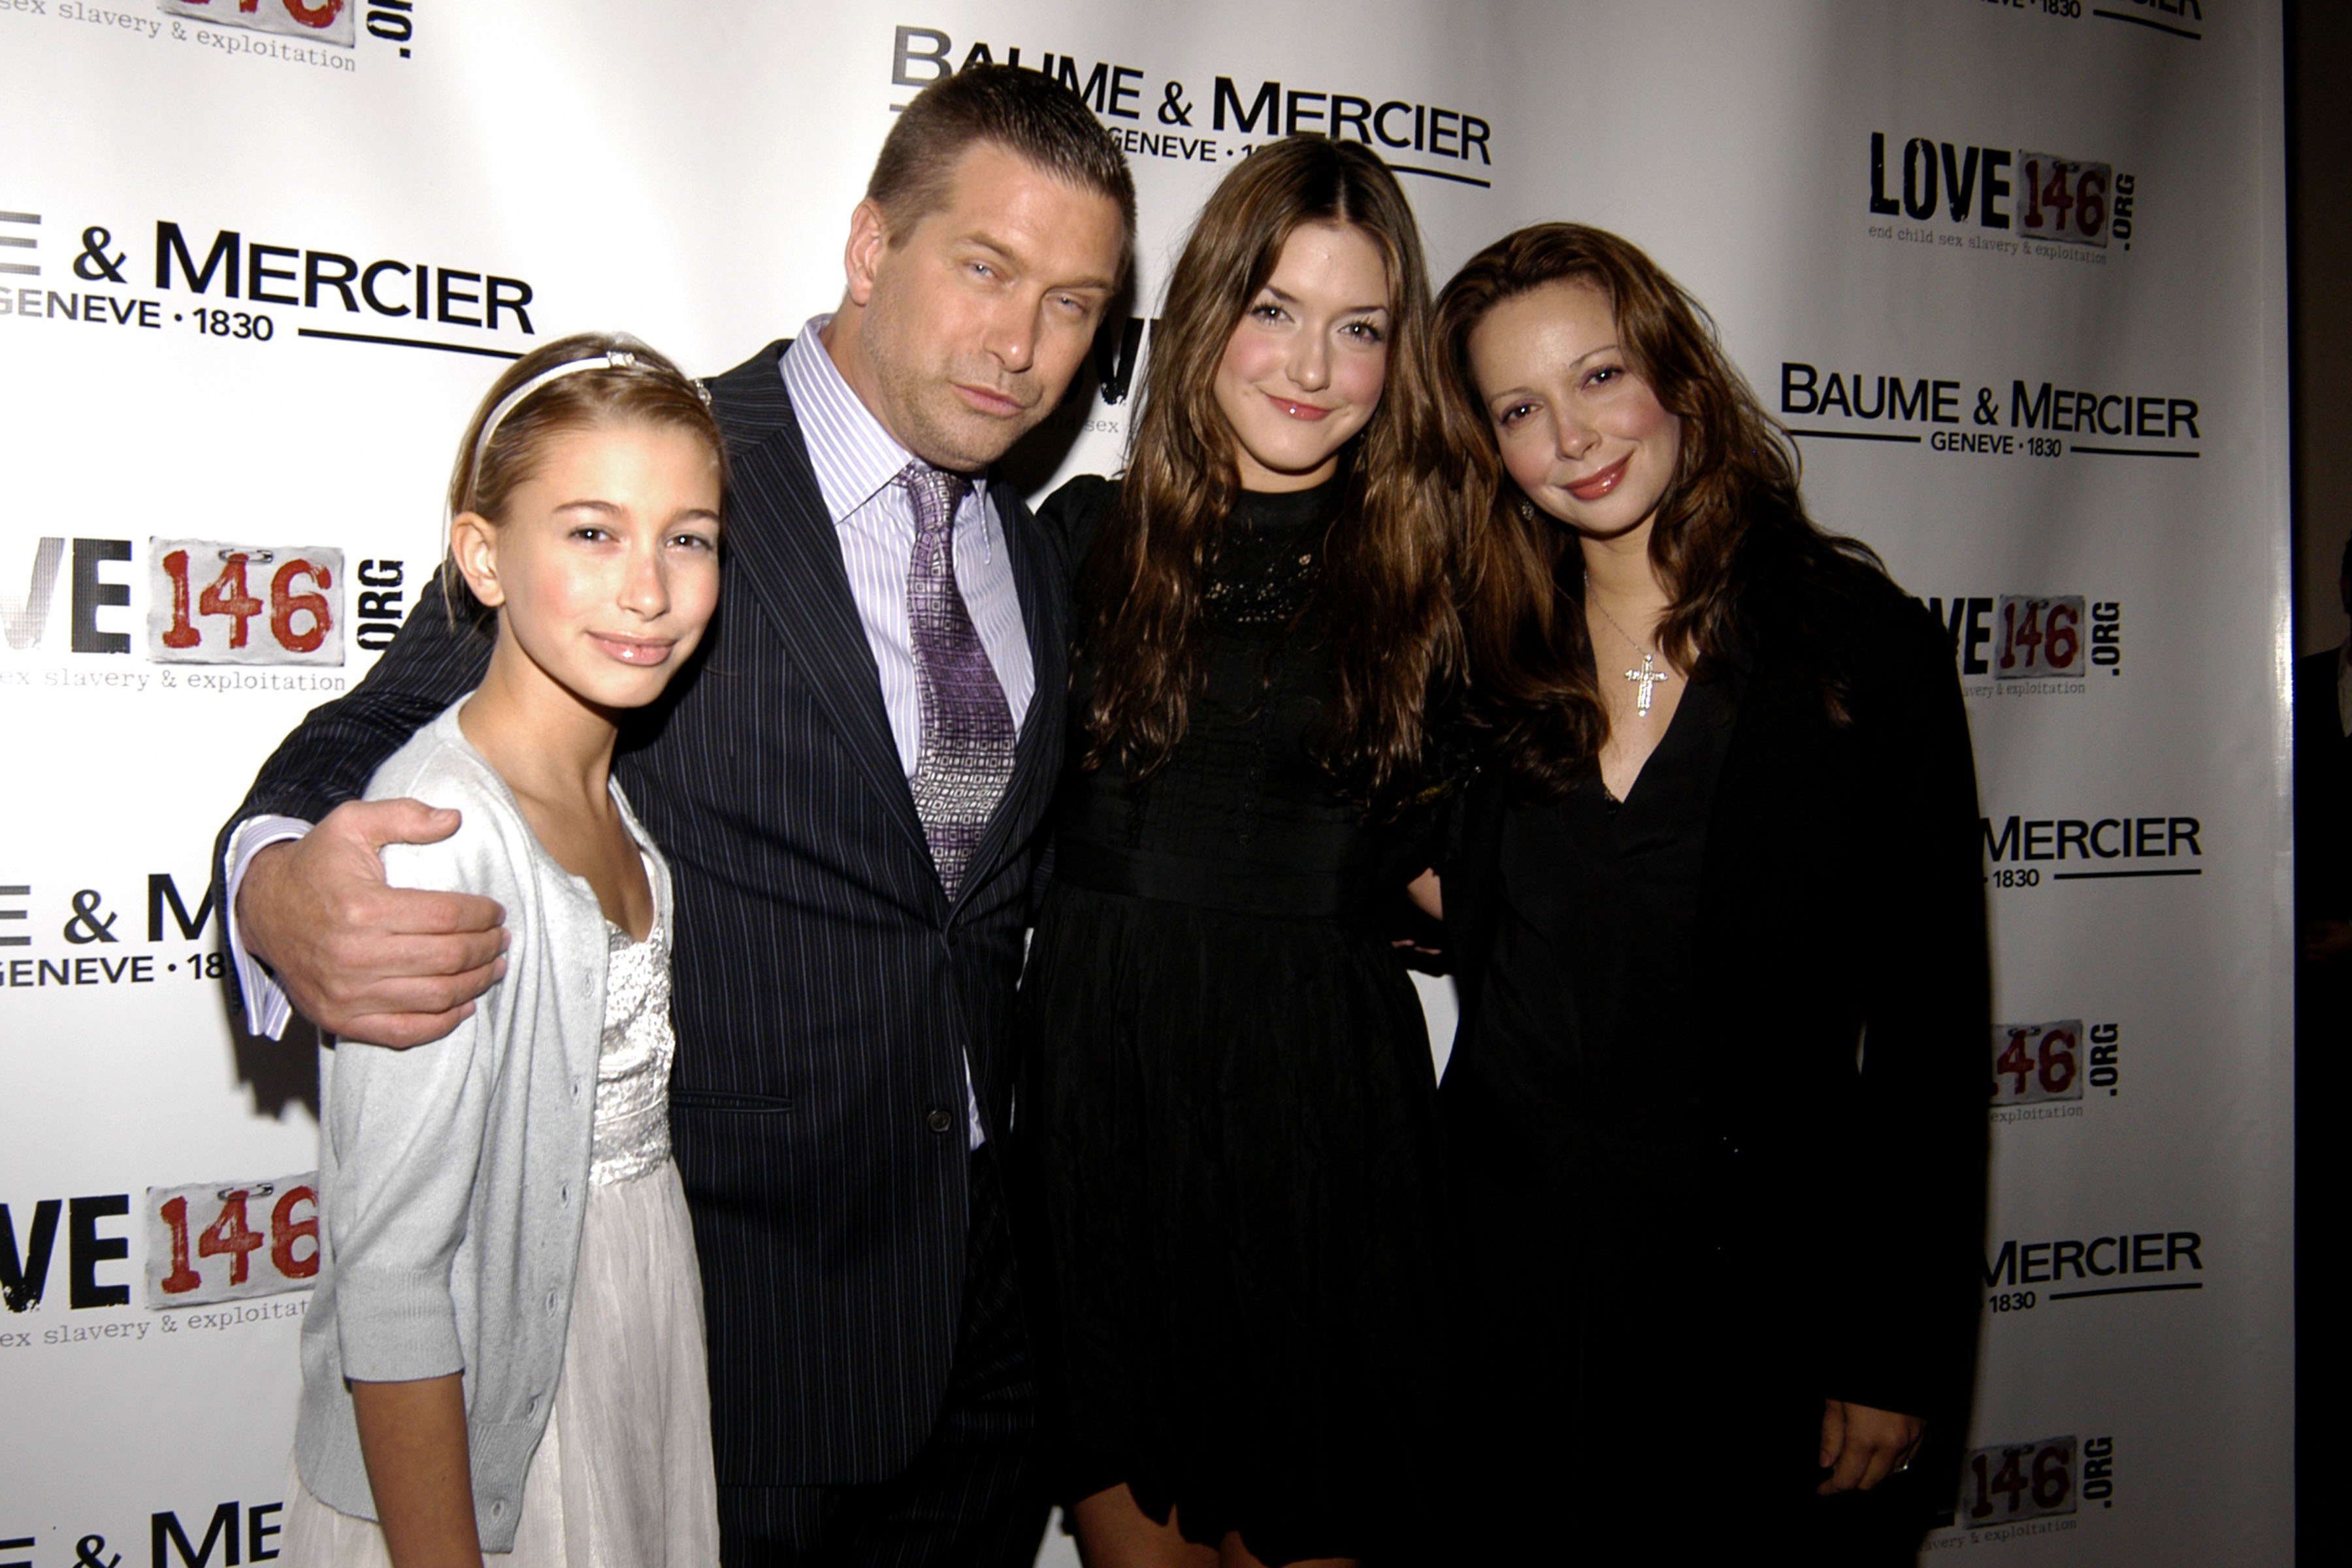 (L-R) Hailey Baldwin, Stephen Baldwin, Alaia Bladwin and Kennya Baldwin attend Baume Mercier and Love146 Fund Raiser at Helen Mills Event Space on November 20, 2008, in New York City. | Source: Getty Images